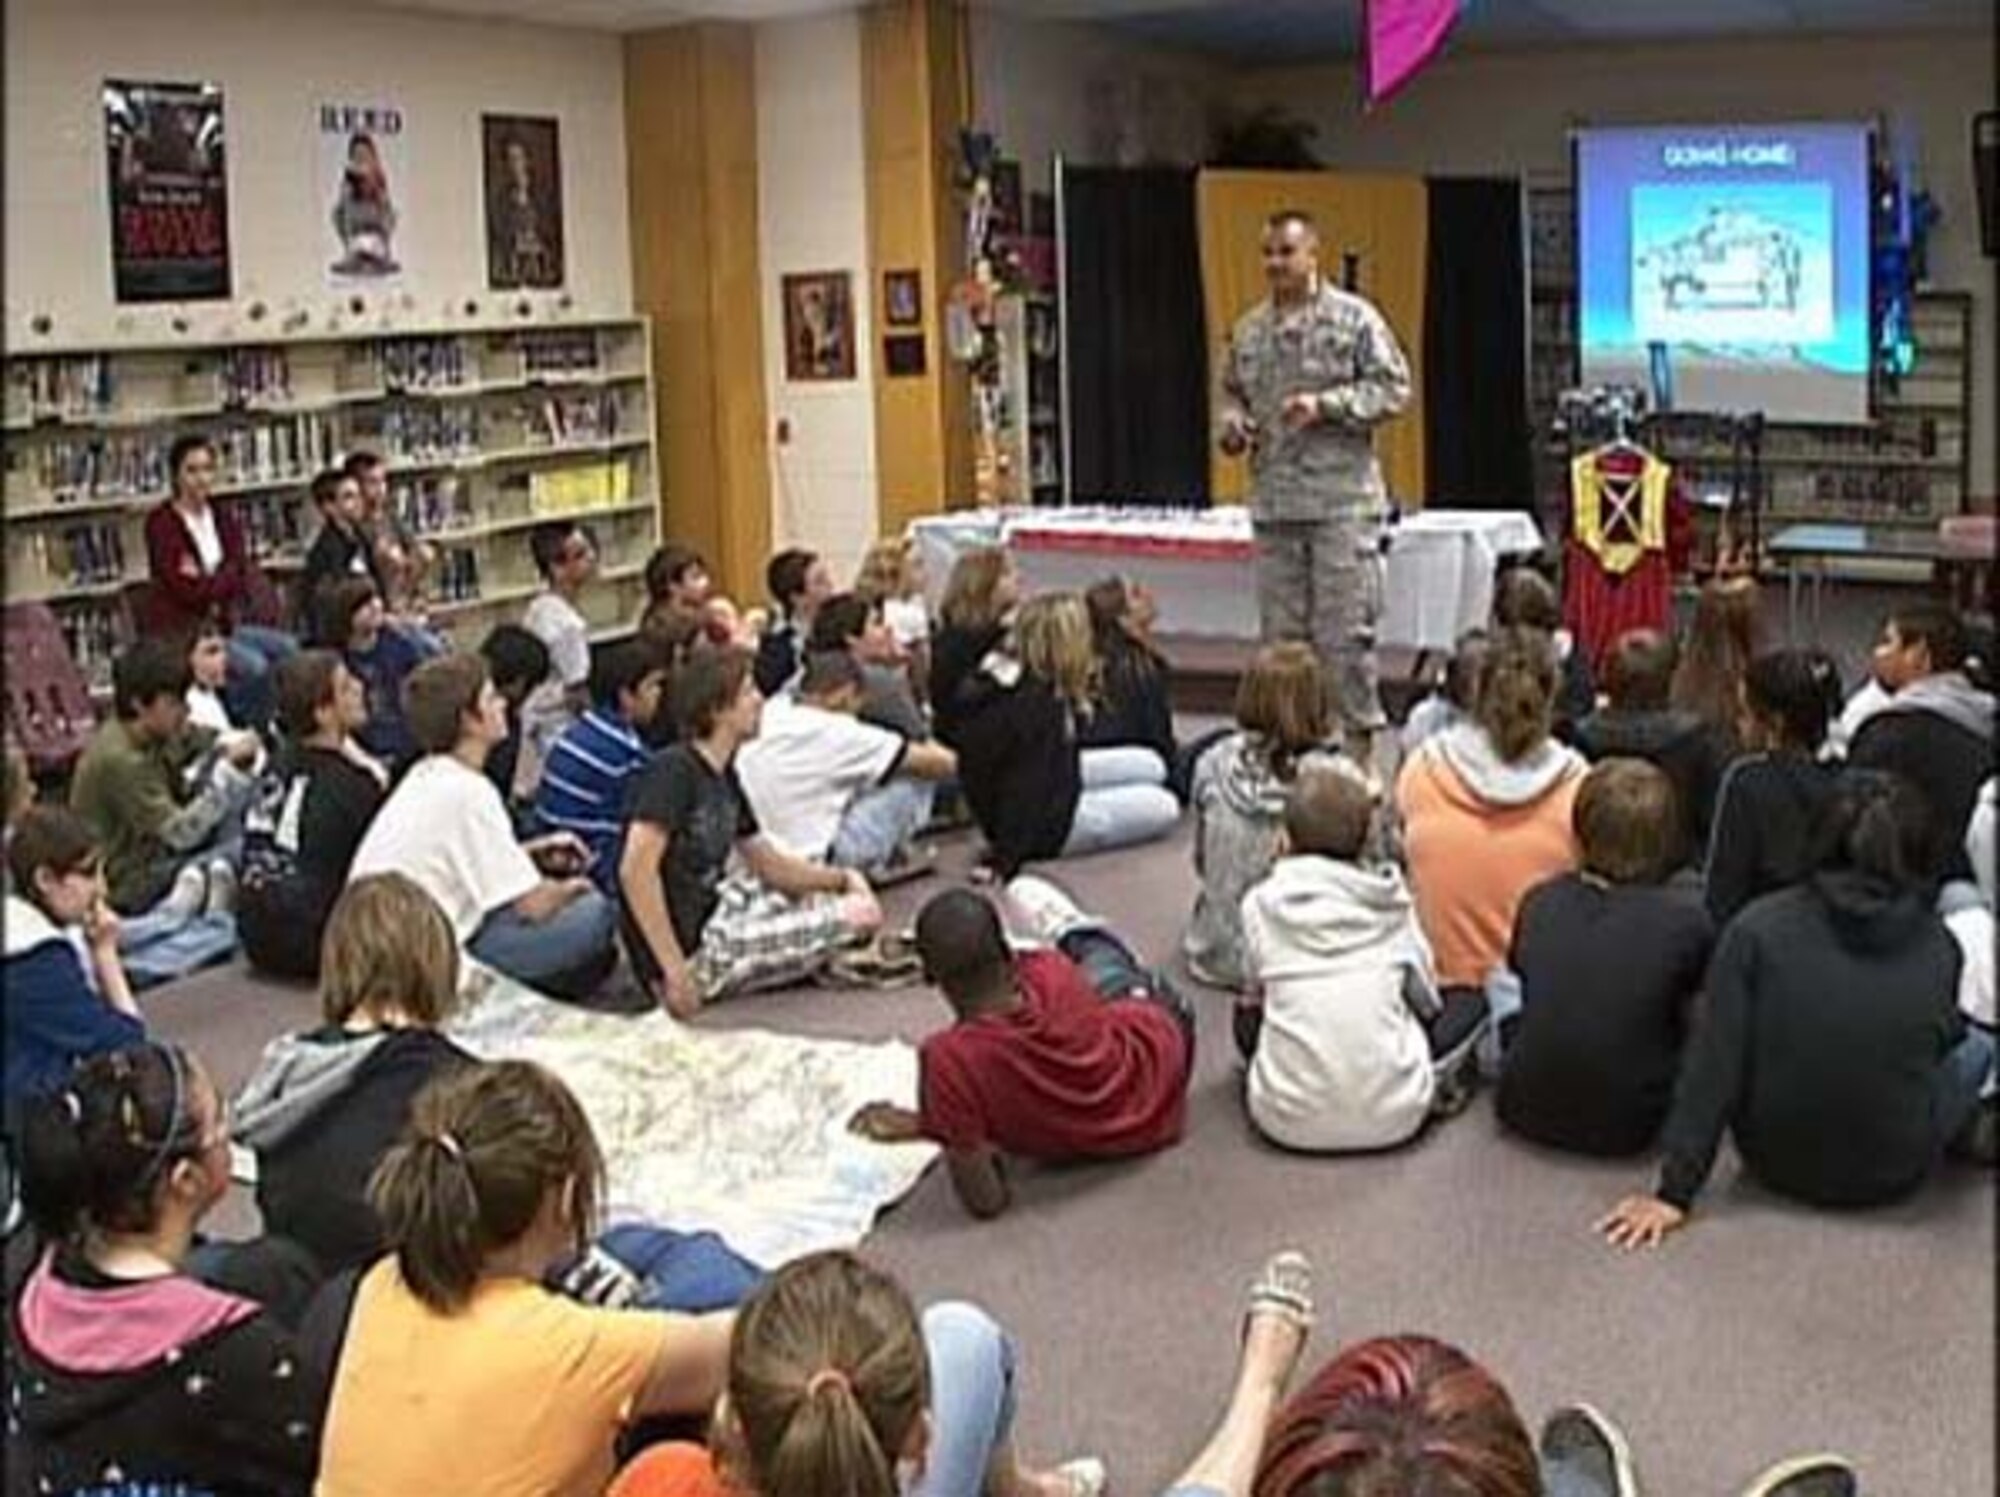 Major Robert Baird an Air Force Reservist from the 507th Air Refeuling Wing recently received a lifesaving award from actions performed in his civilian job as a Broken Arrow, Oklahoma police officer.  The major is shown here in a May 2009 file photo presenting a speech to a Broken Arrow elementary classroom on his military experiences.